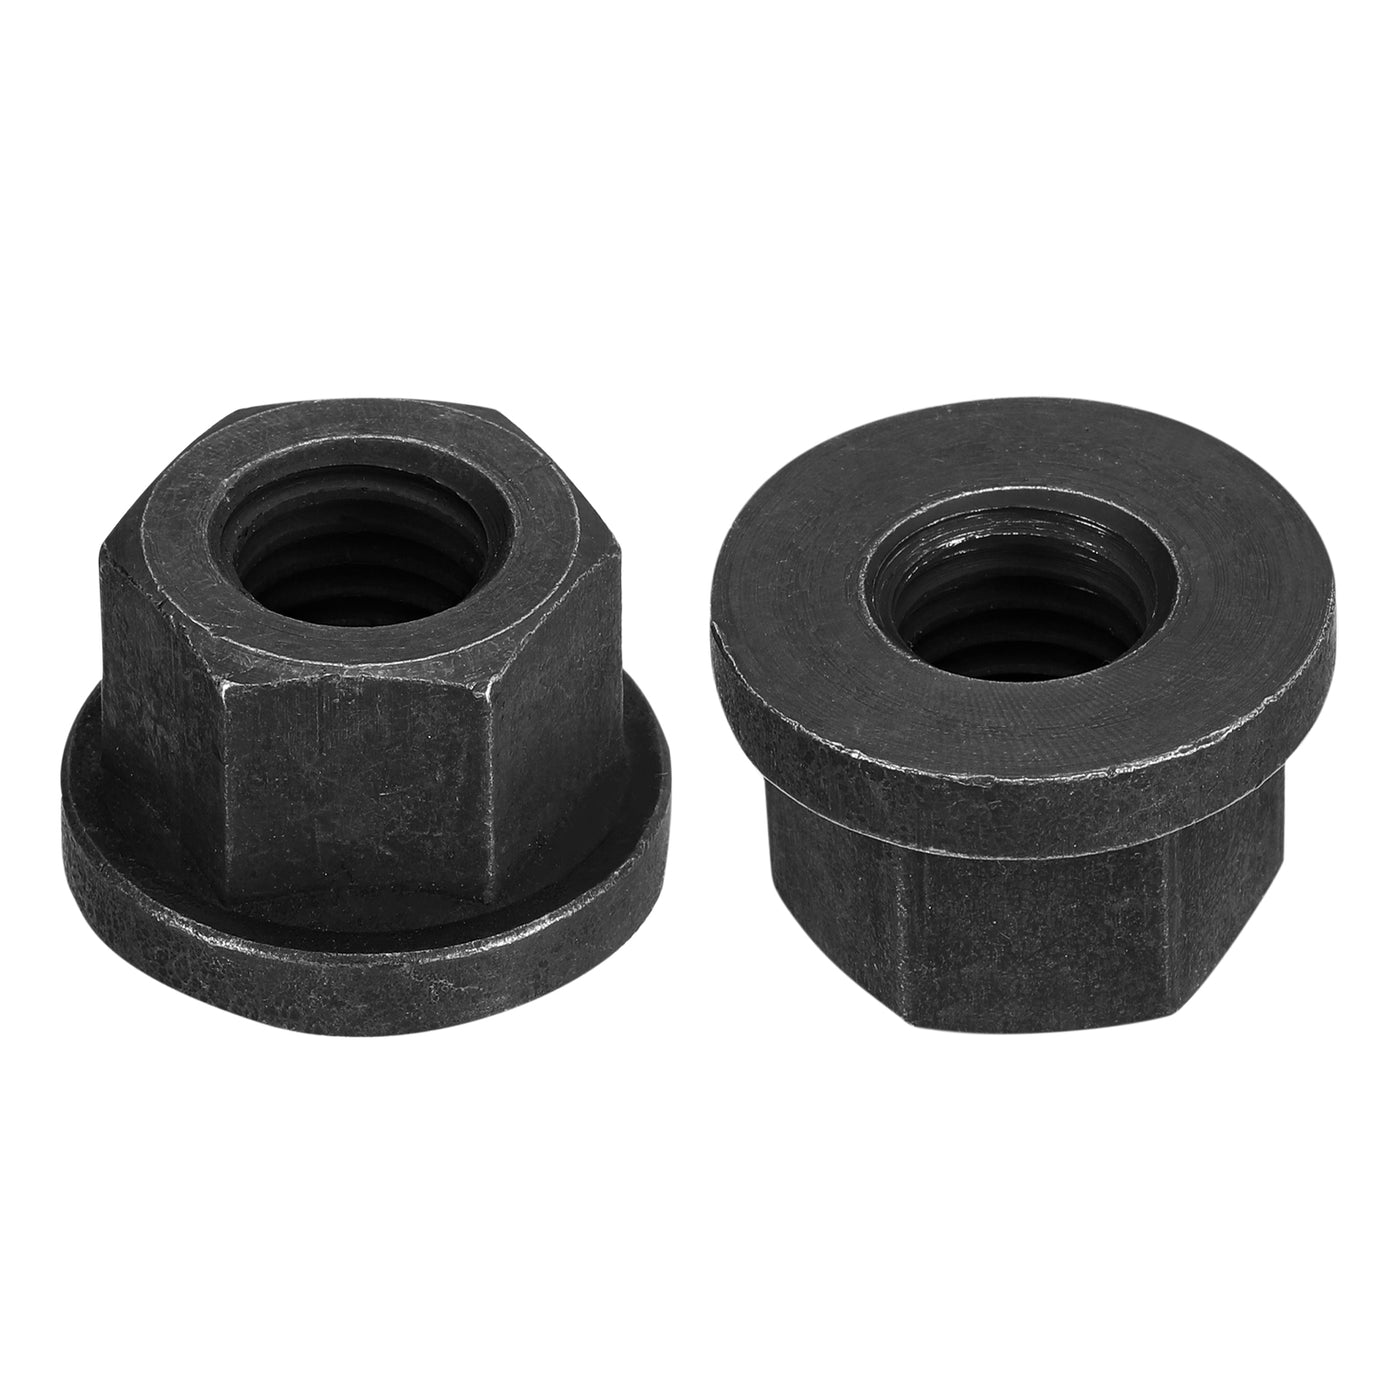 uxcell Uxcell 5/8-11 Flange Hex Lock Nuts, 2pcs Grade 10.9 Carbon Steel Hex Flange Nuts